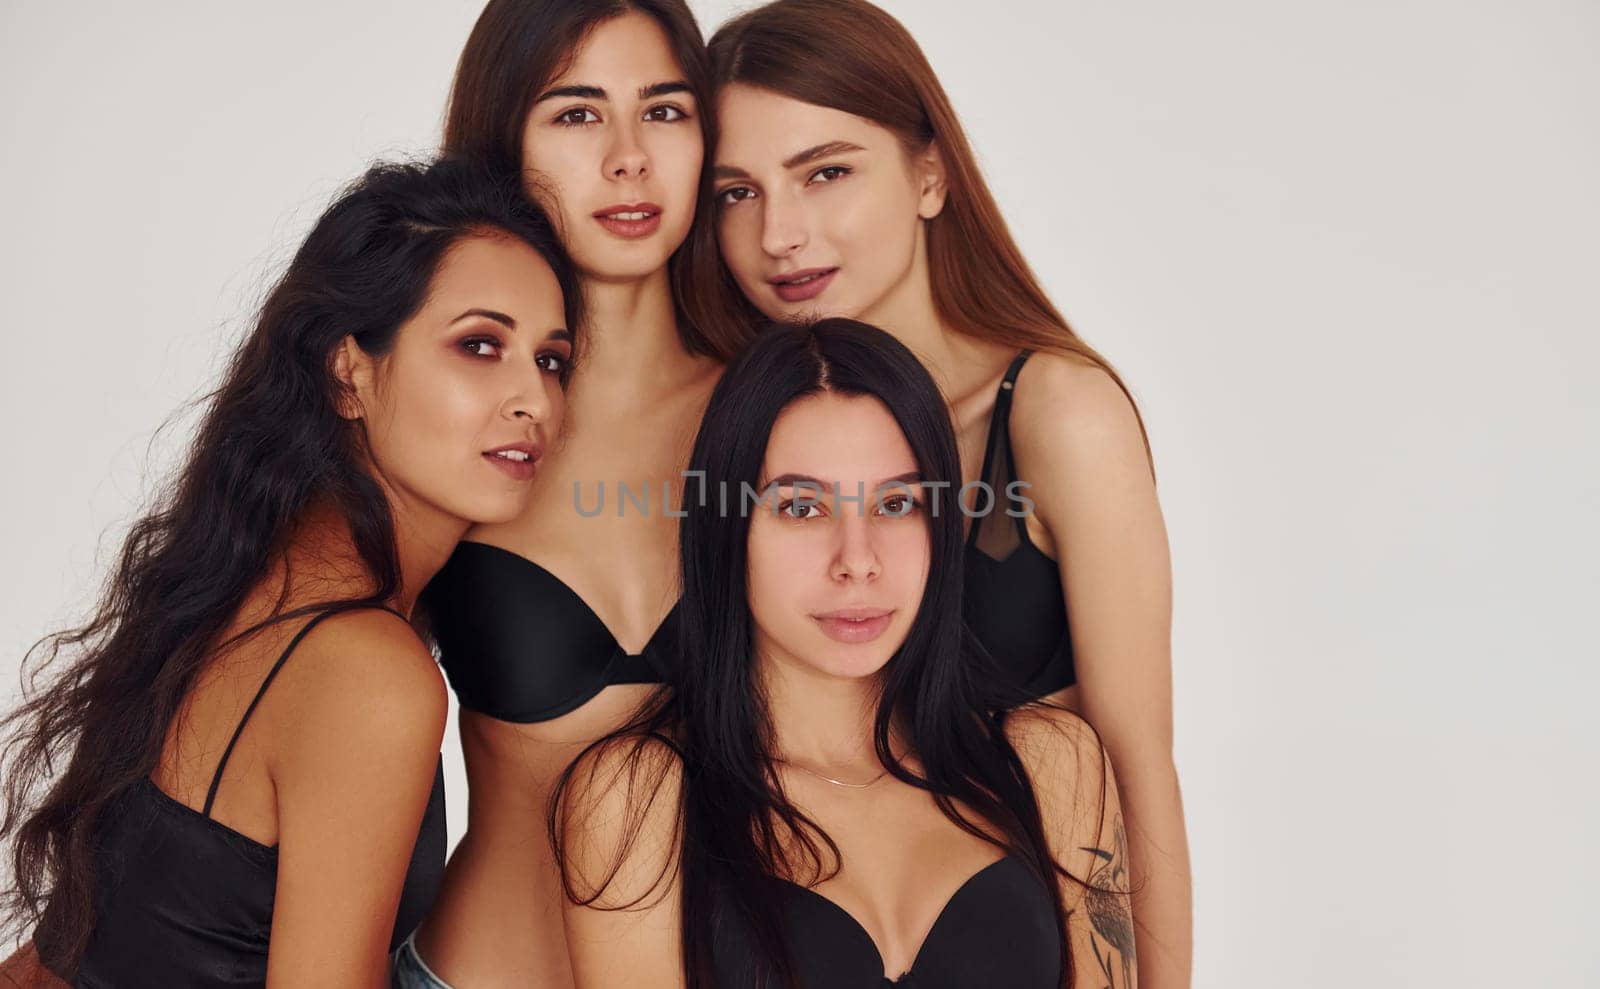 Leaning on each other. Four young women in lingerie together indoors. White background by Standret